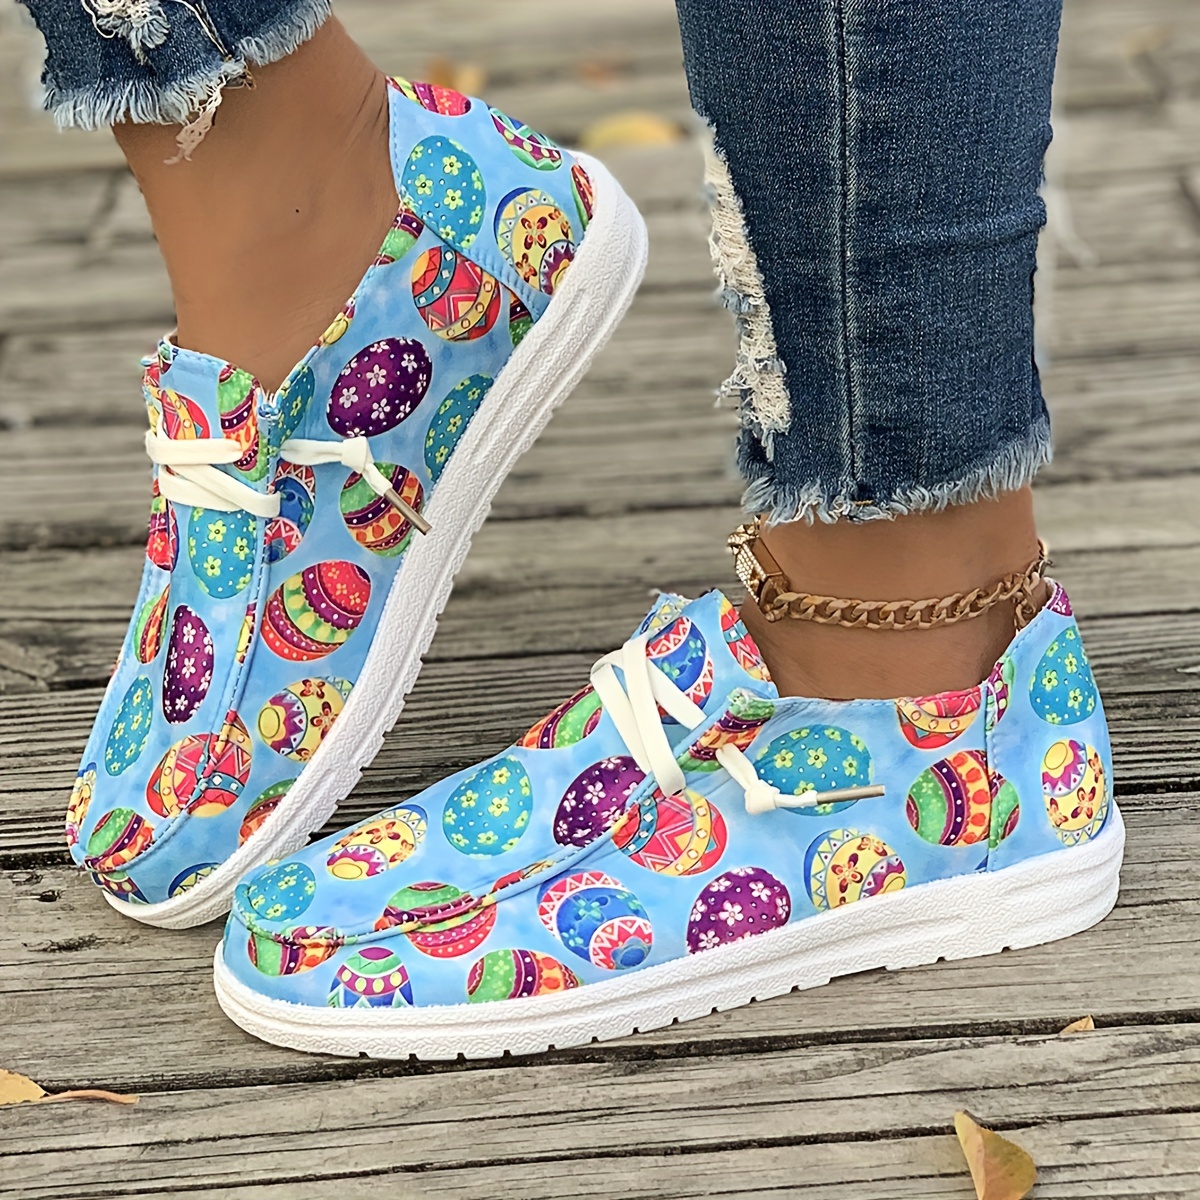 

Women's Fashion Skateboard Shoes, With Colorful Eggs Pattern On The Shoe Surface, Flat And Lightweight Skate Shoes With Lace-up Design For Easter